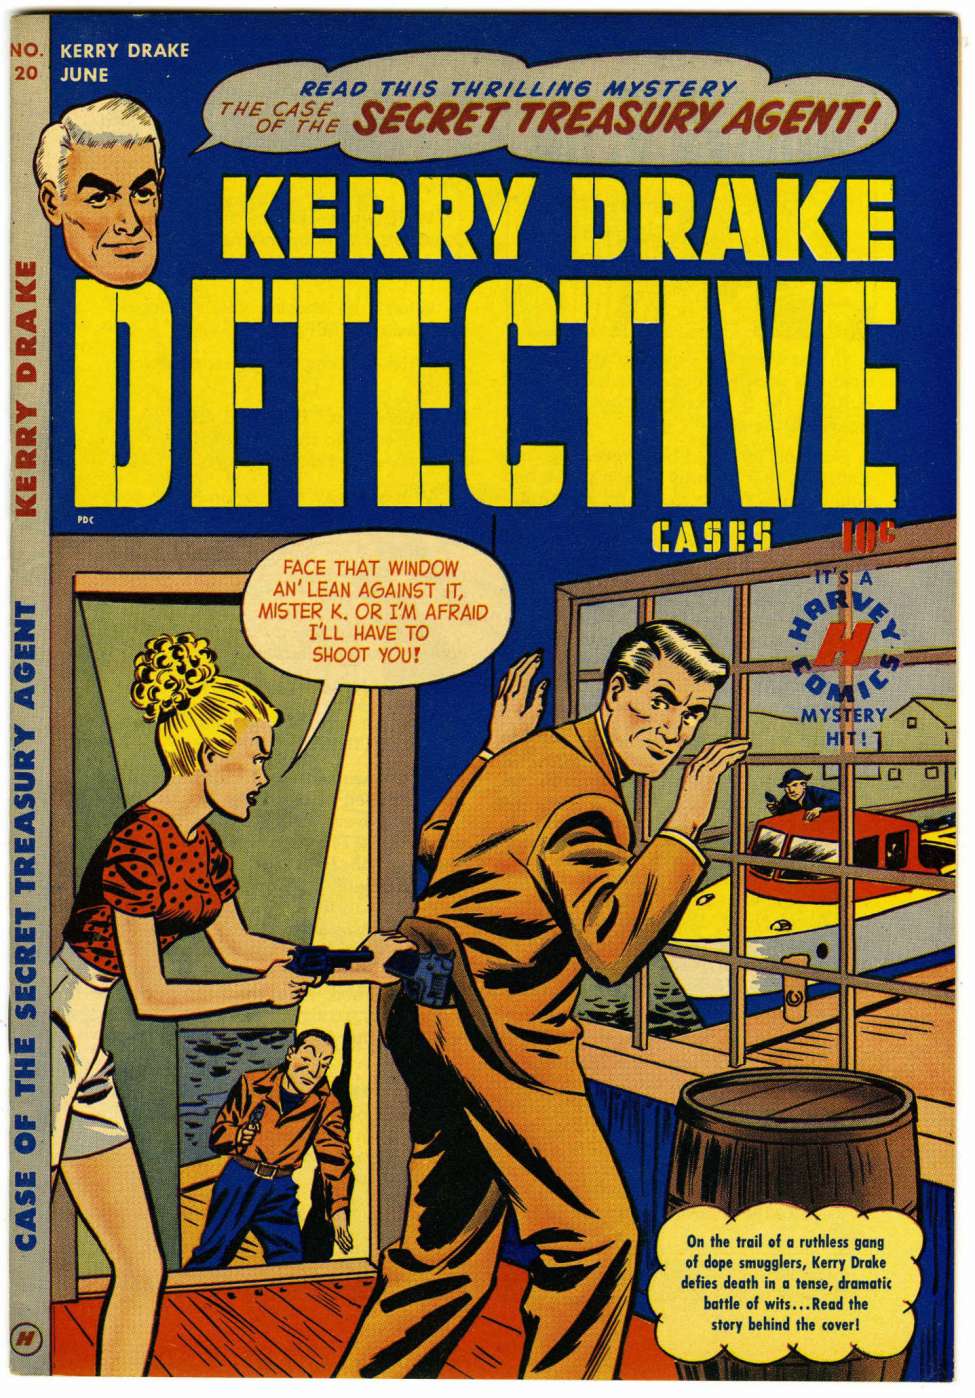 Comic Book Cover For Kerry Drake Detective Cases 20